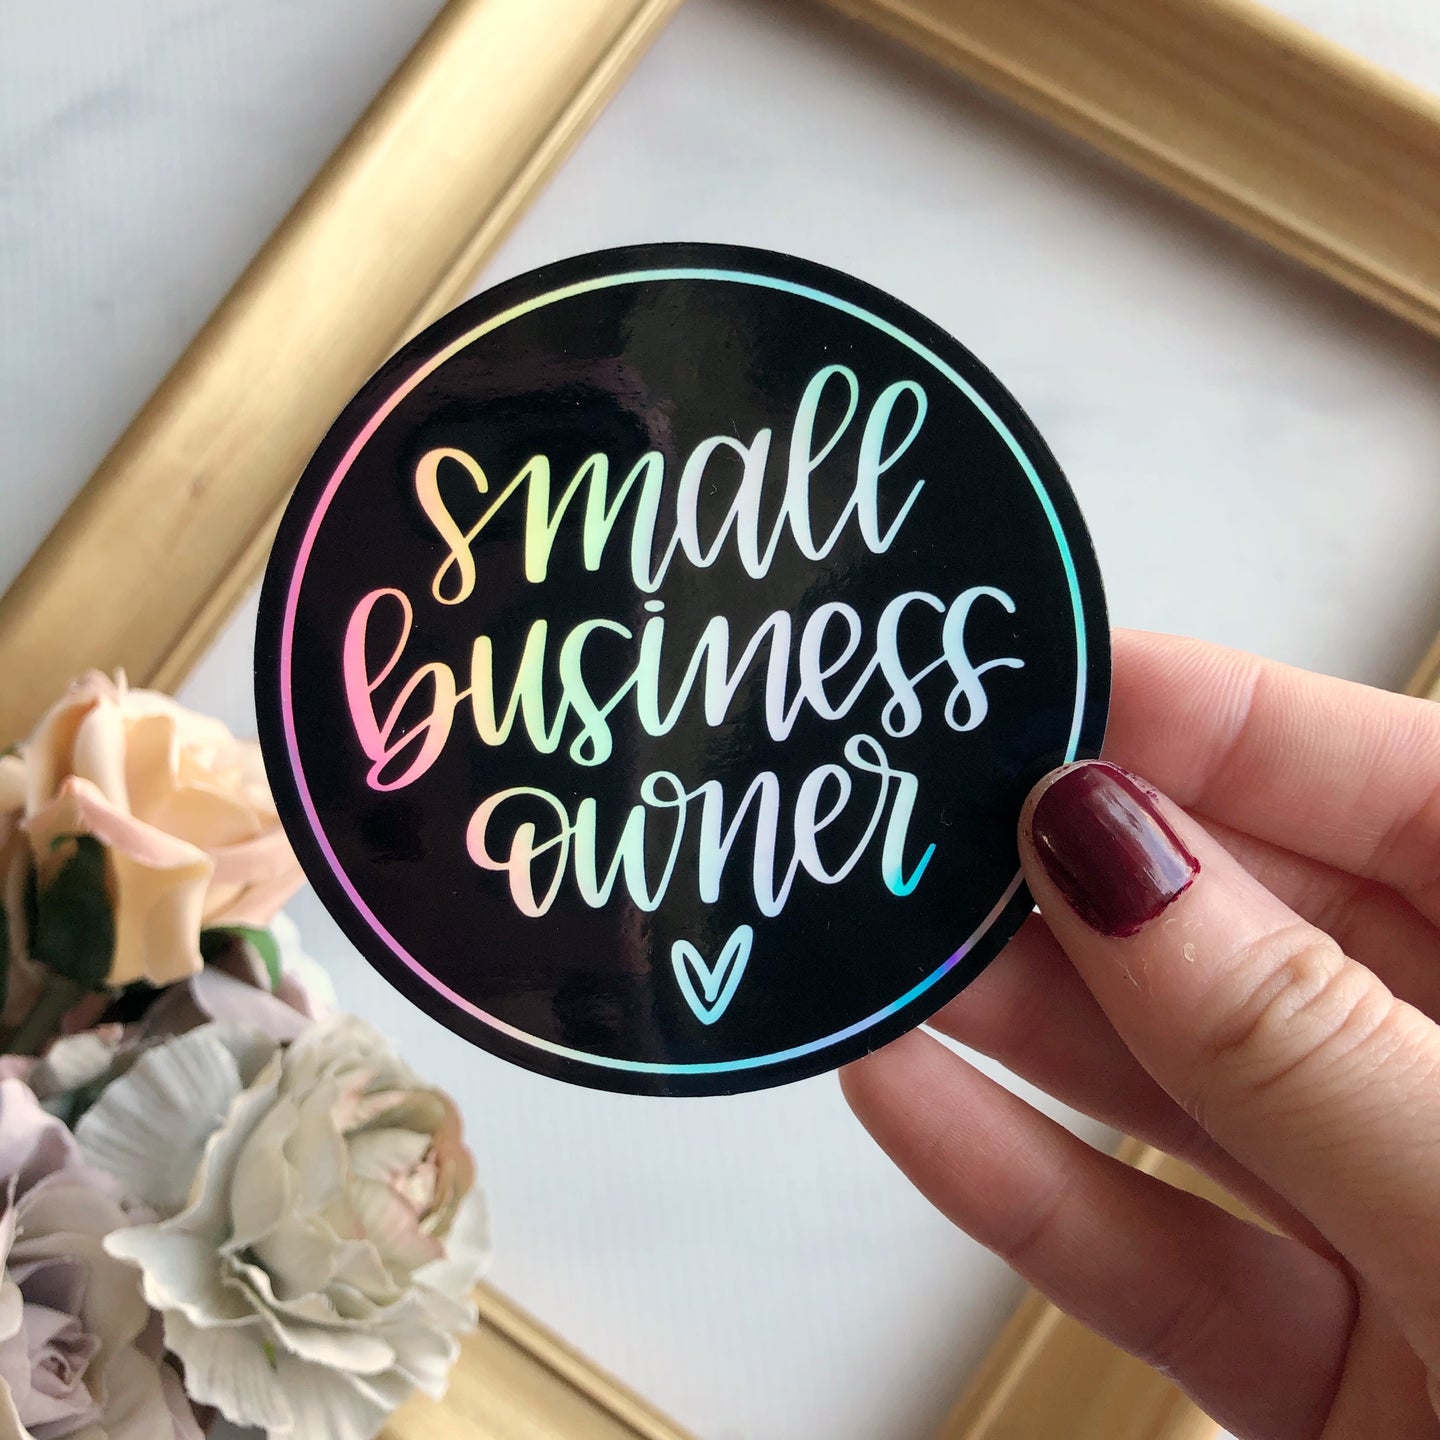 Small Business Owner Holographic WATERPROOF Sticker